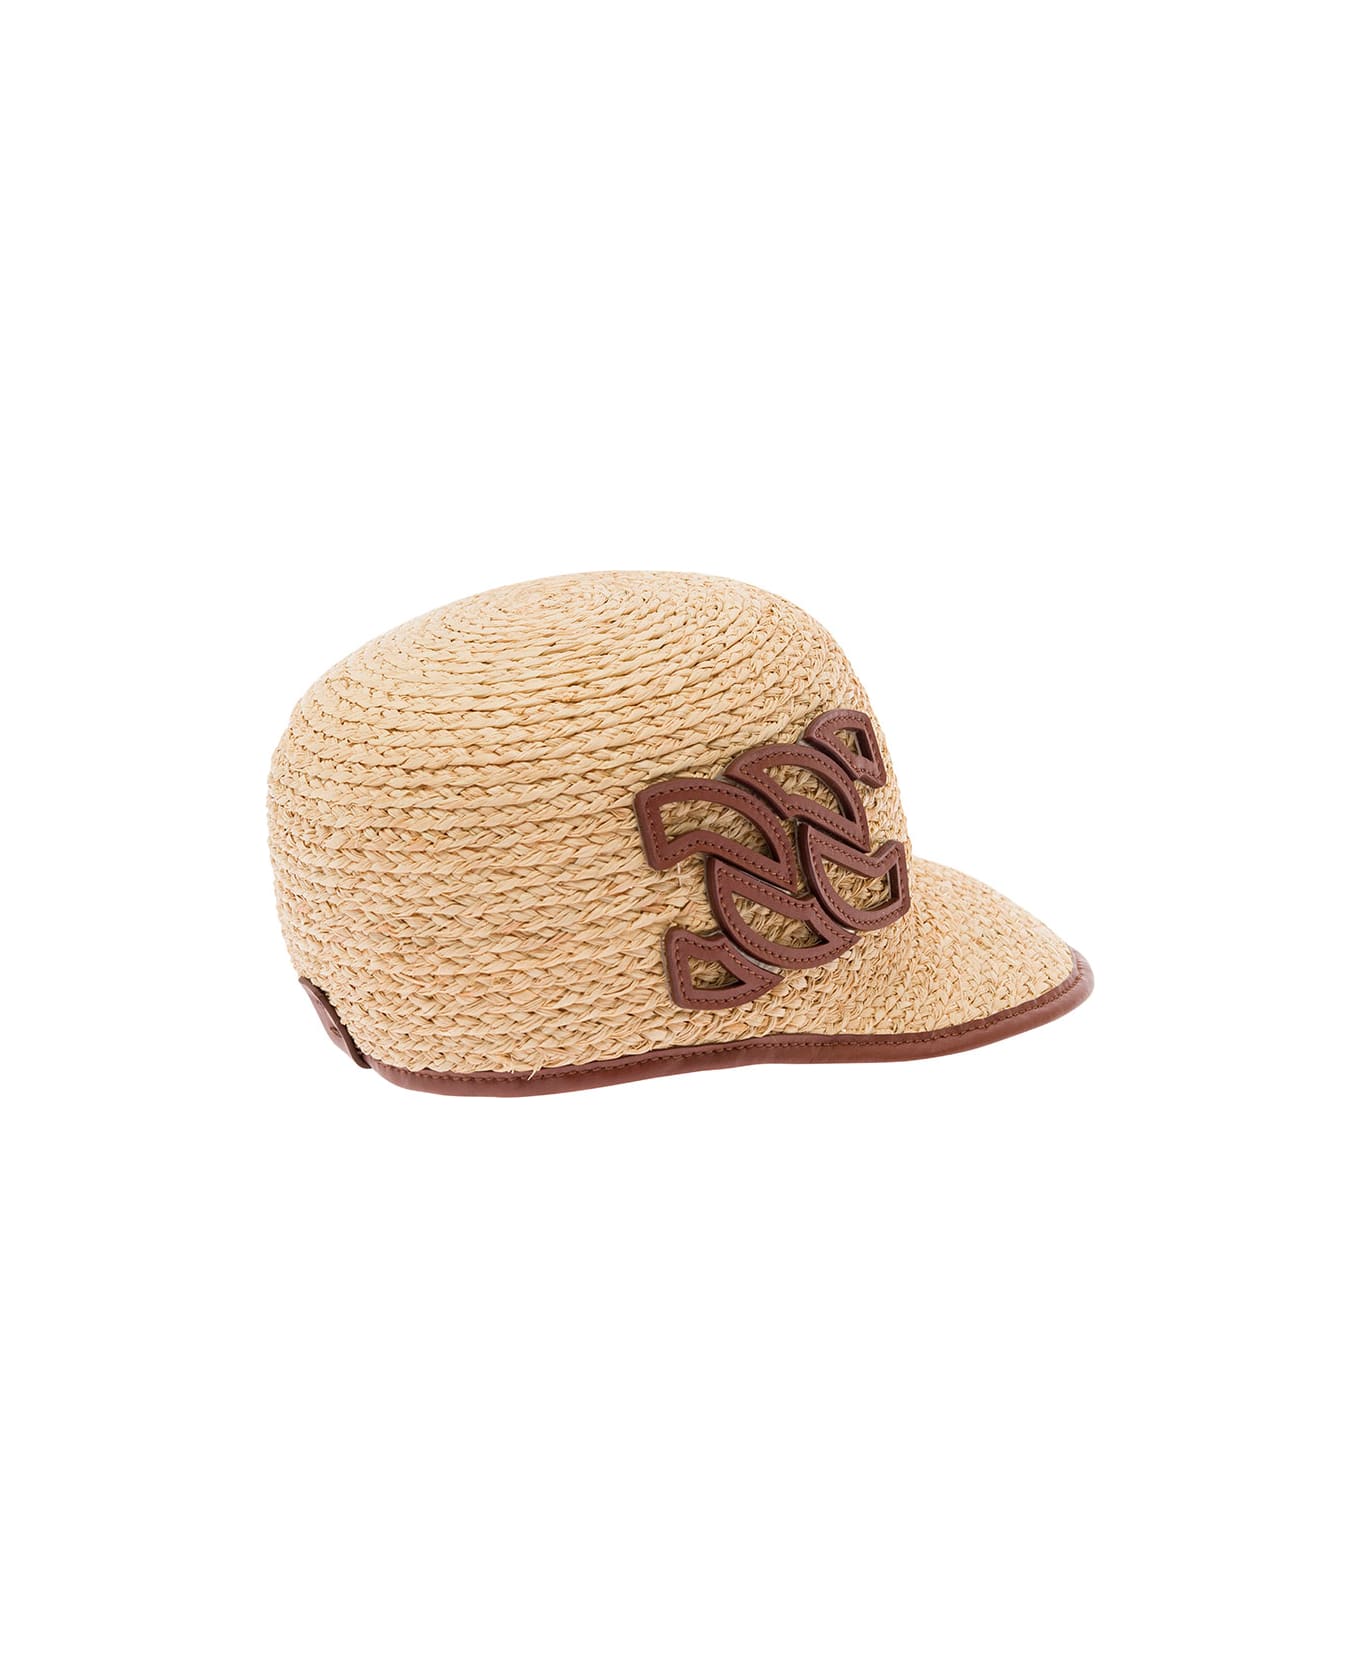 Casadei Beige Baseball Cap With Logo Detail In Leather And Rafia Woman - Beige 帽子